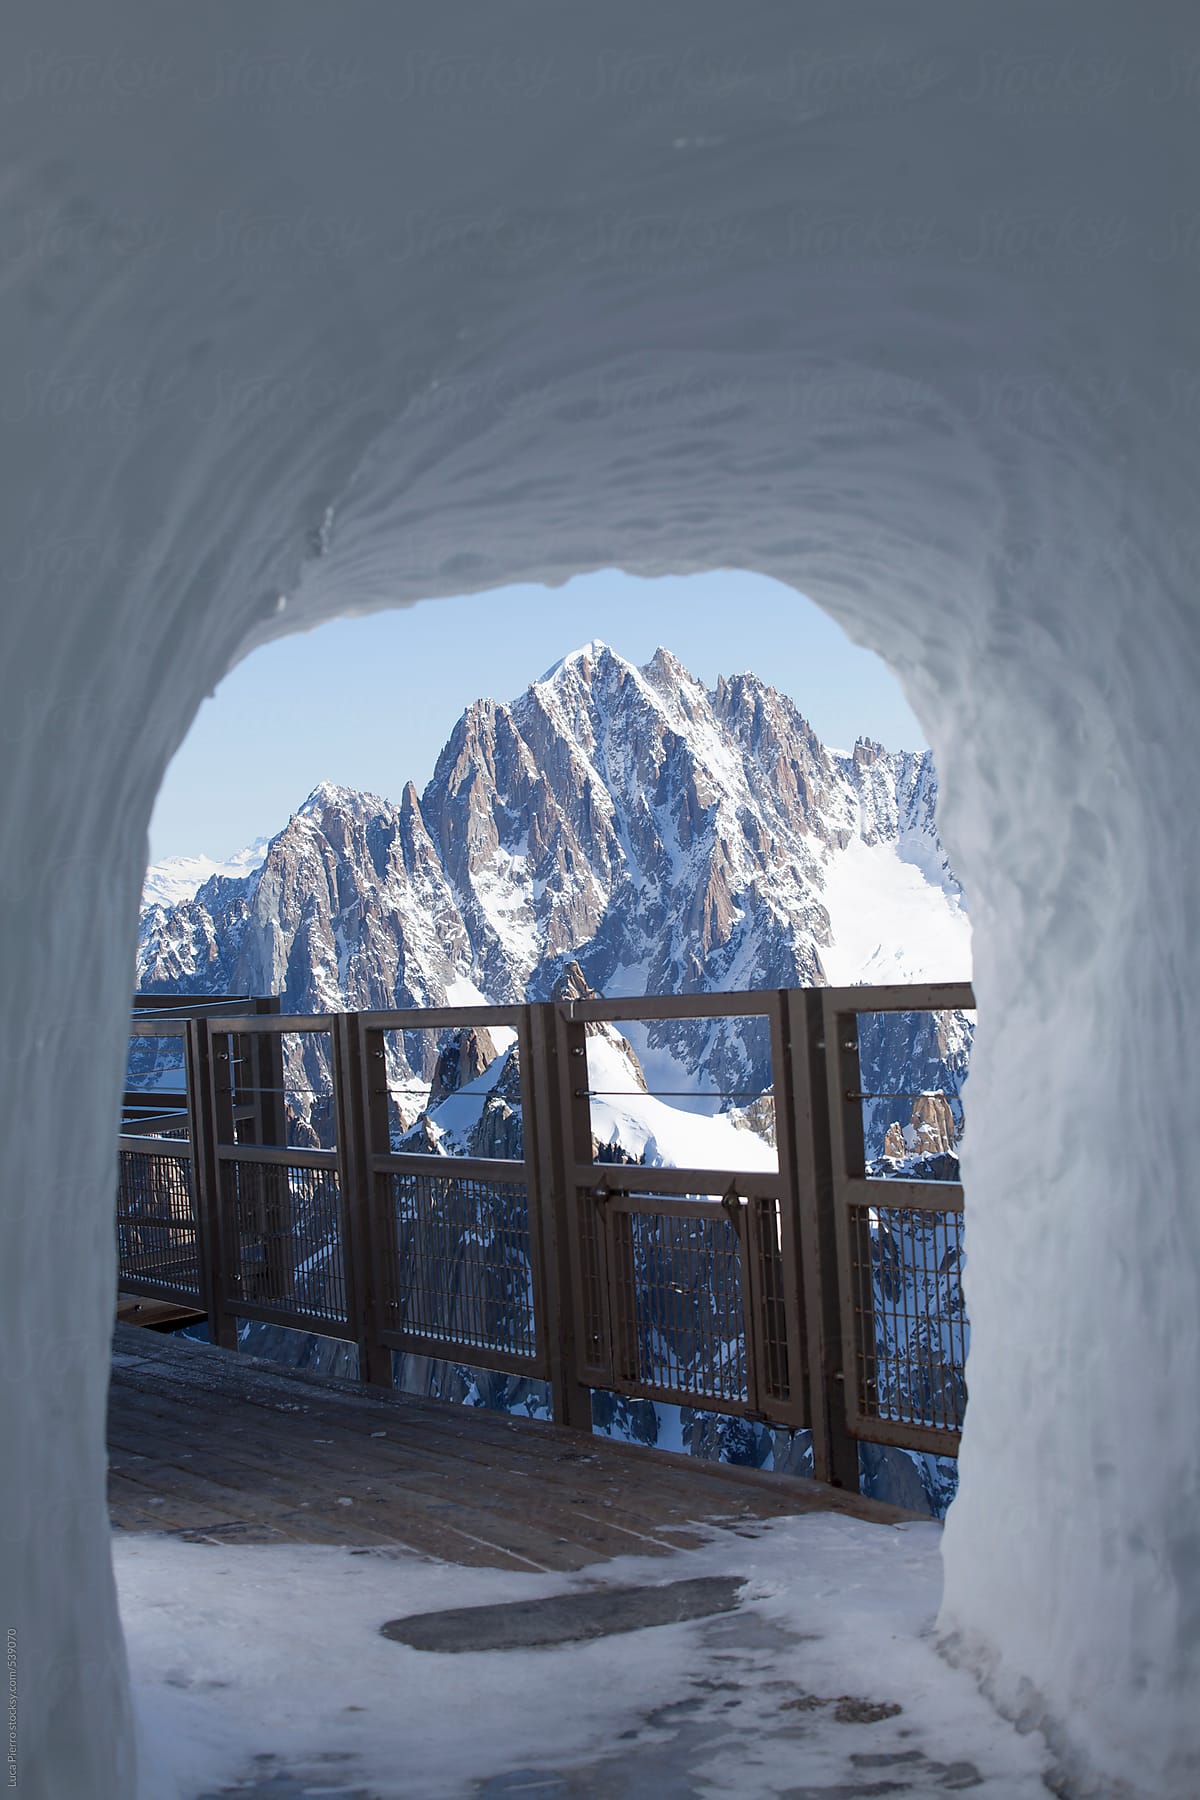 Mont Blanc massif through a tunnel in the snow